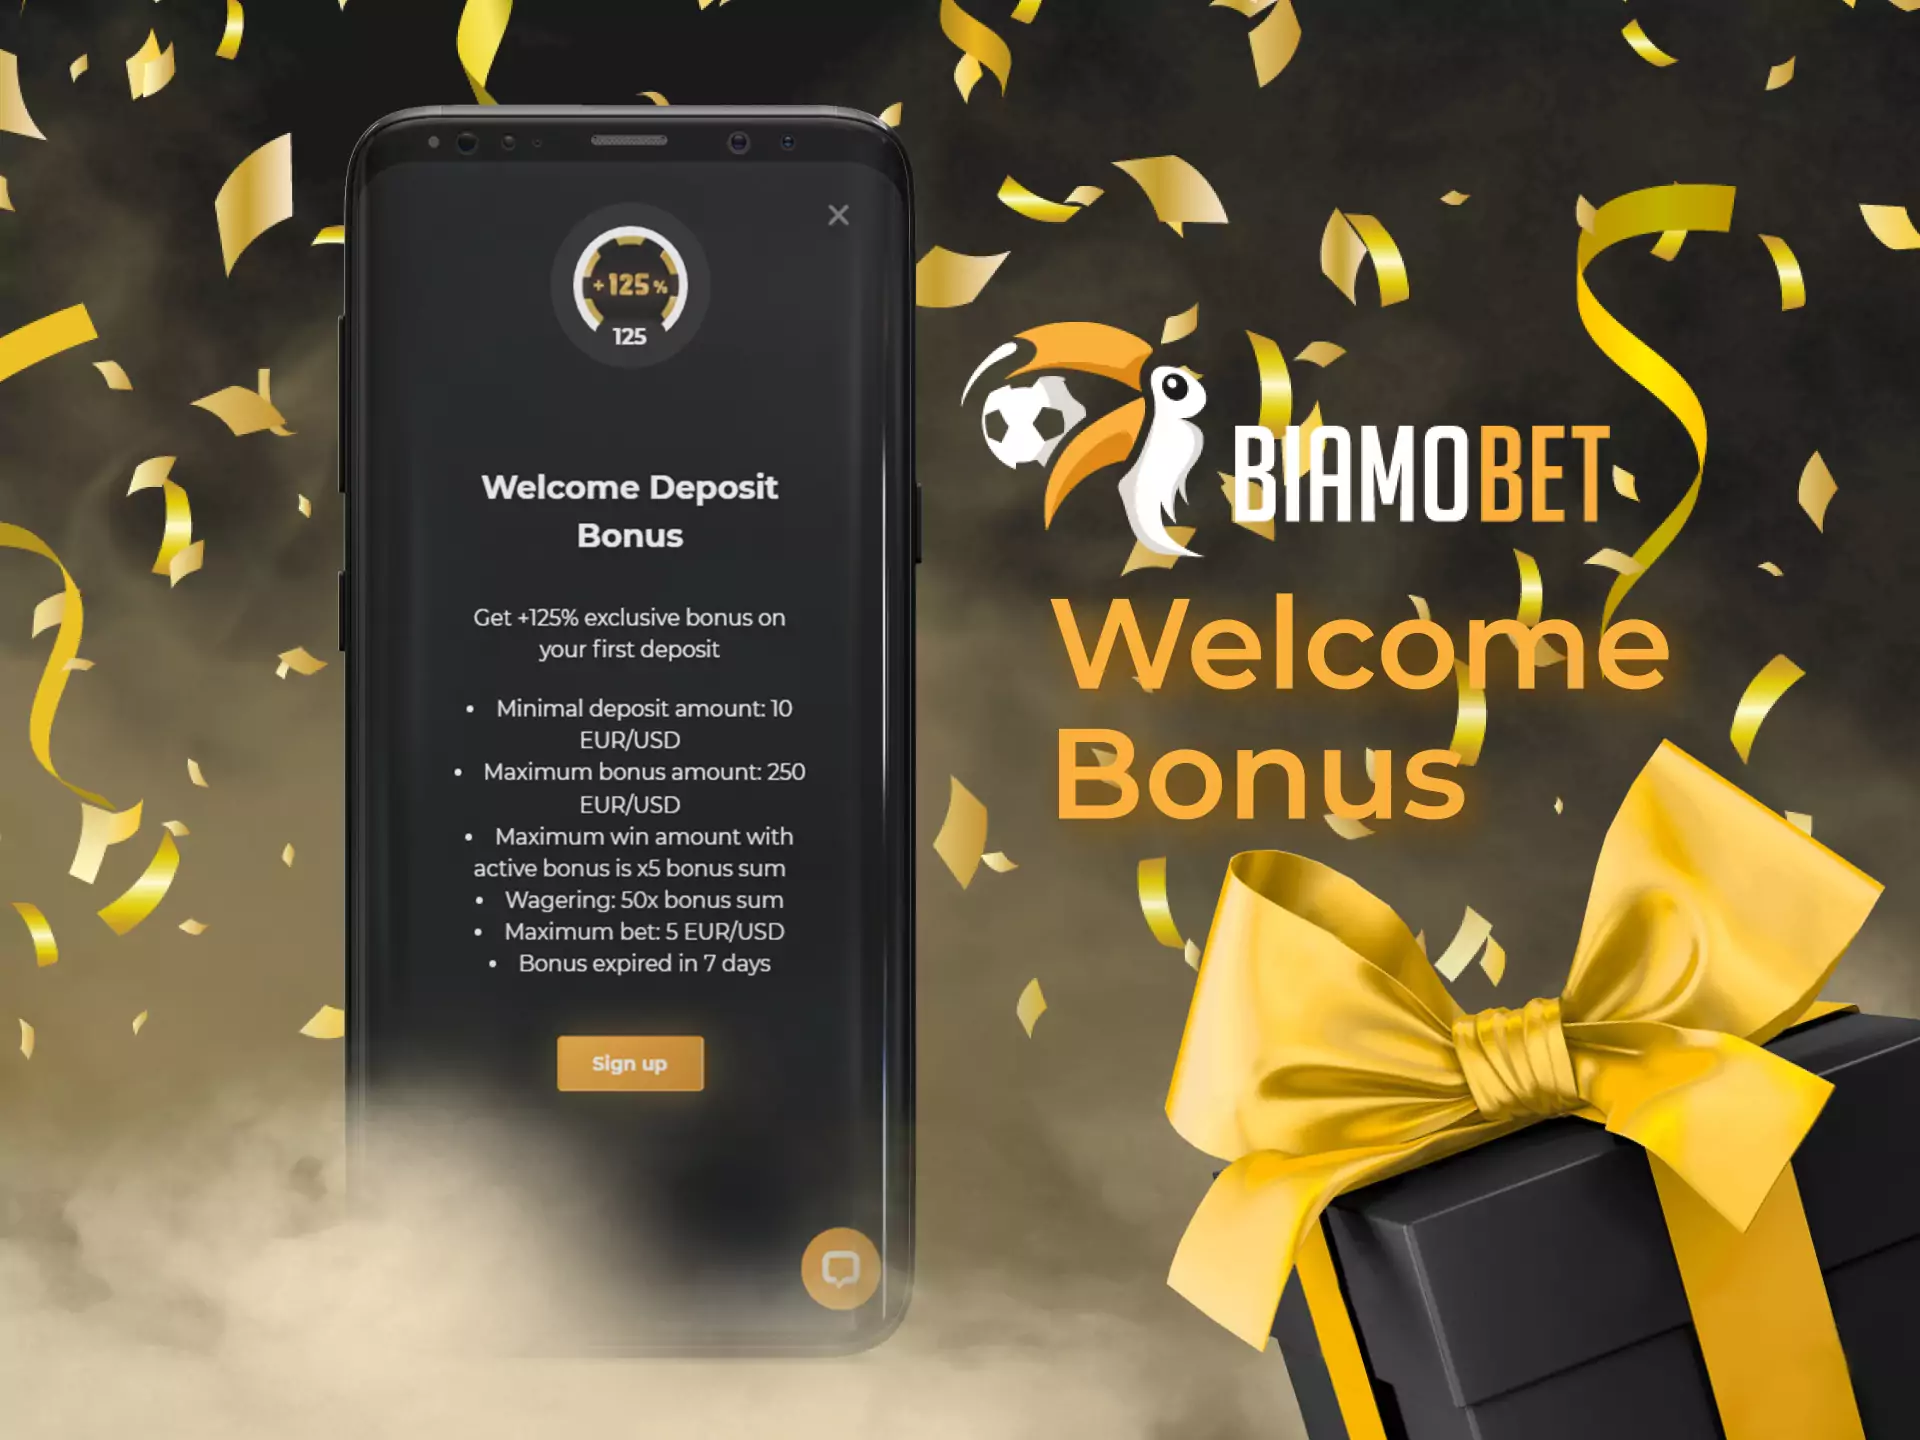 For new users, there is a special welcome offer in the Biamobet app and on the site.